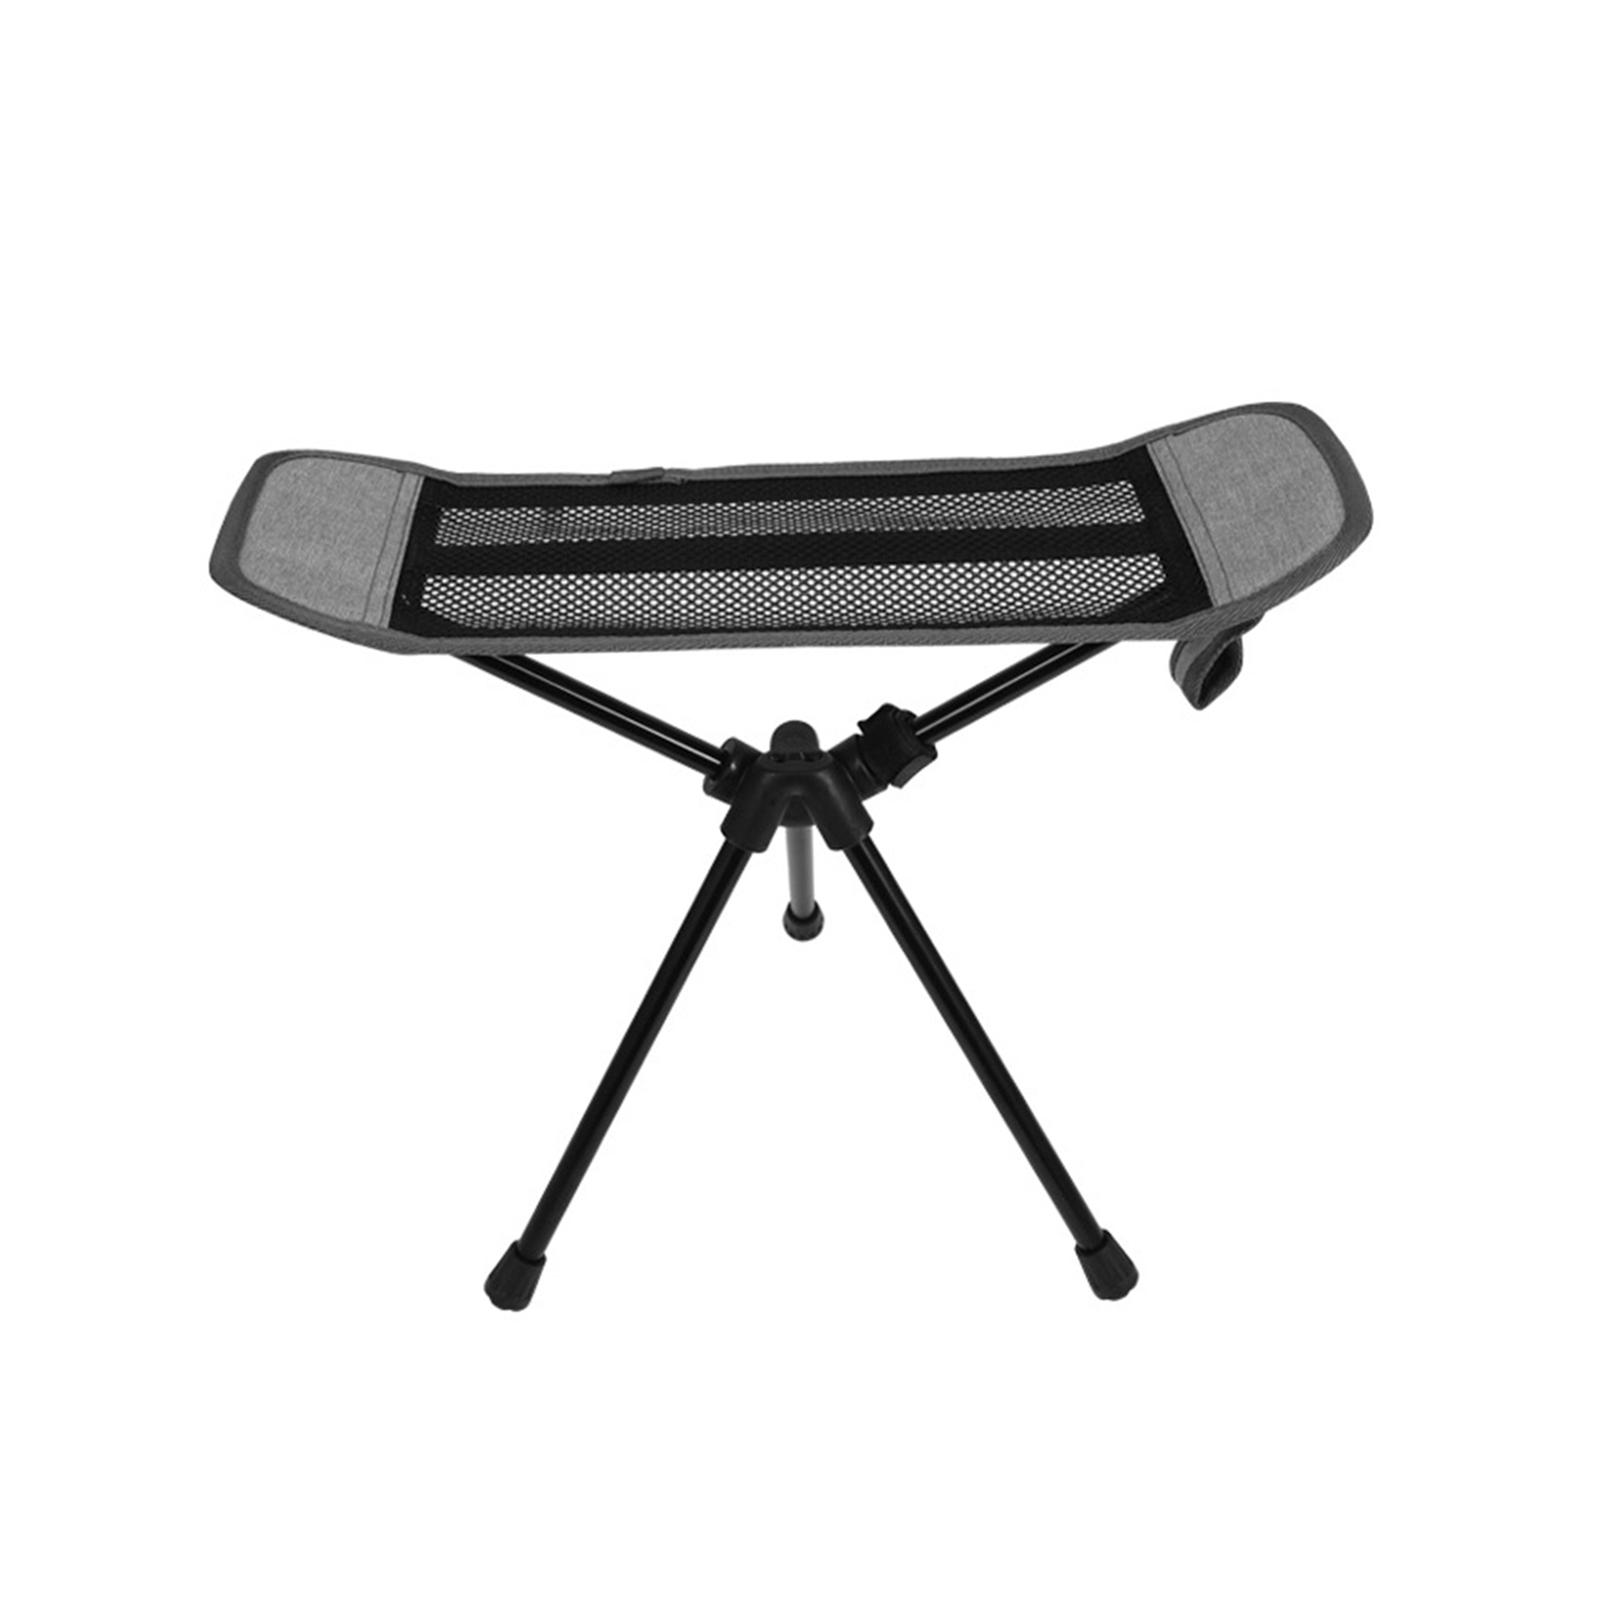 Portable Folding Chair Ottoman Outdoor Recliner Lazy Footrest Leg Rest Camping Chair Footstool for Hiking Fishing Picnic - image 1 of 10